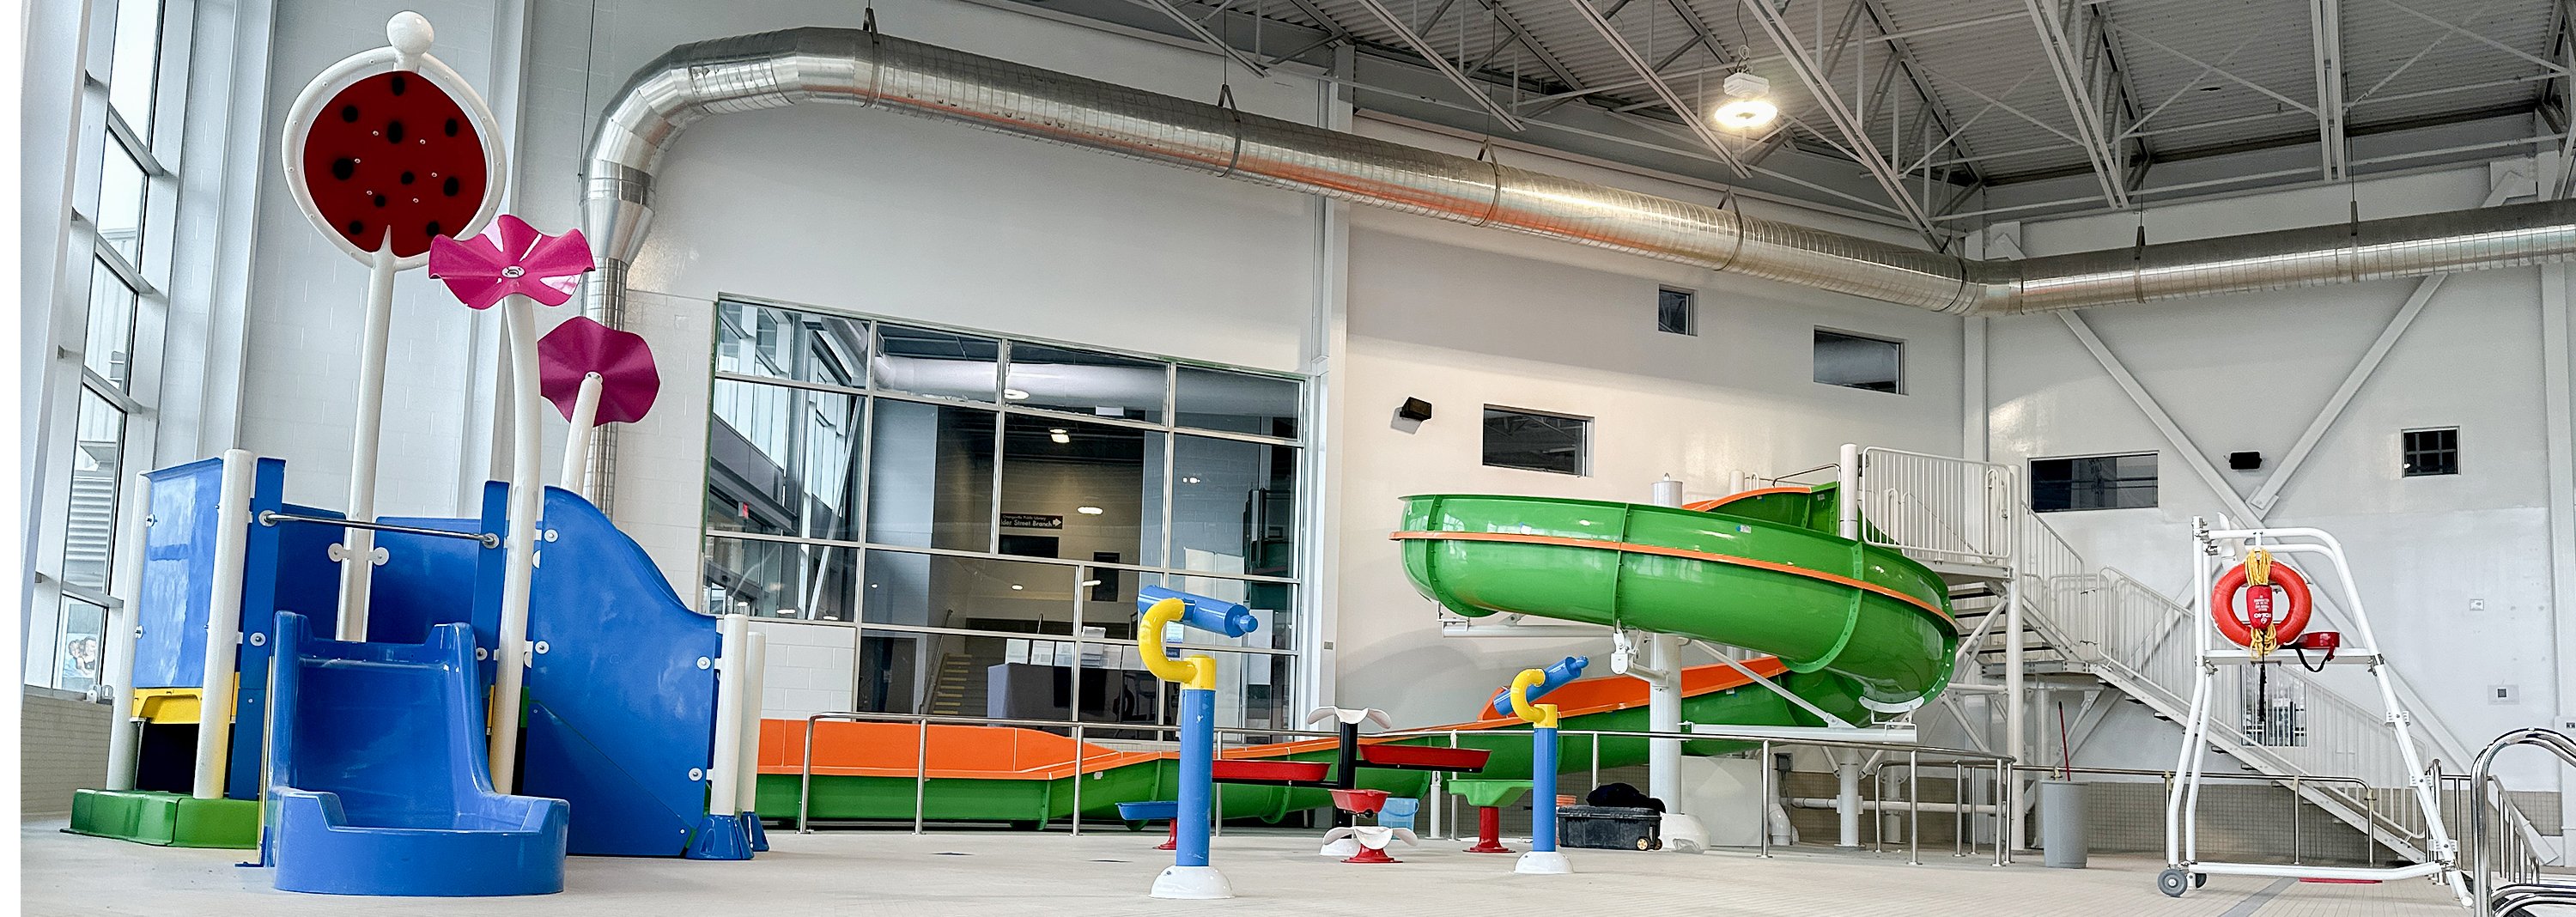 An indoor play area near a pool with two water slides and additional water features